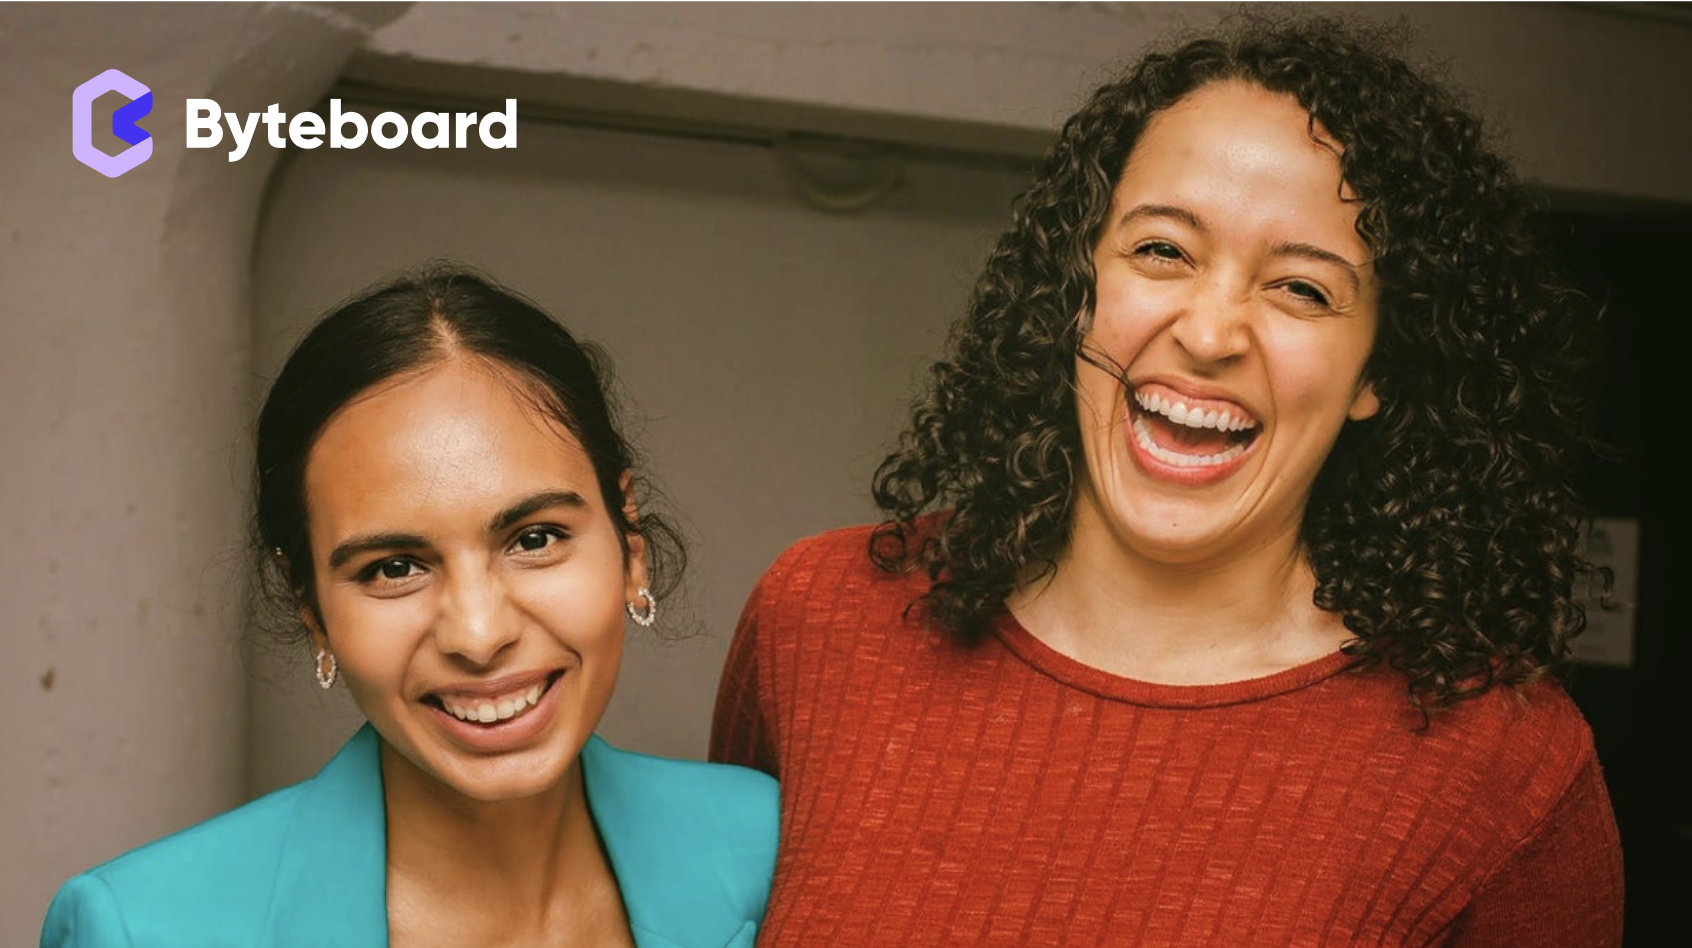 Byteboard founders against a grey-brown background